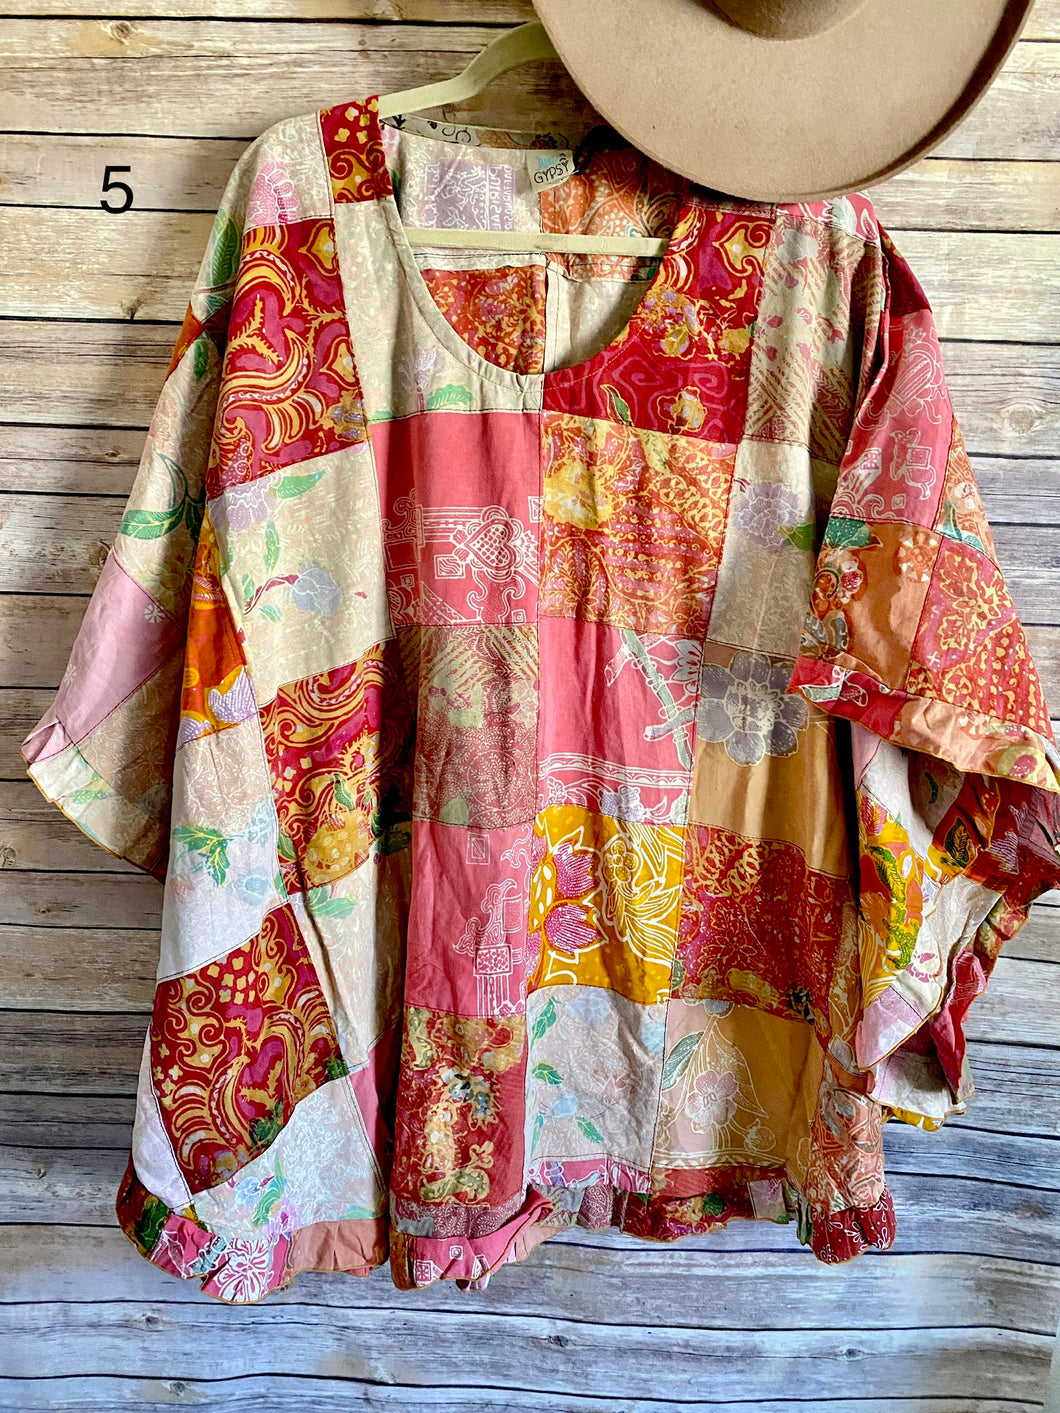 The patchwork poncho